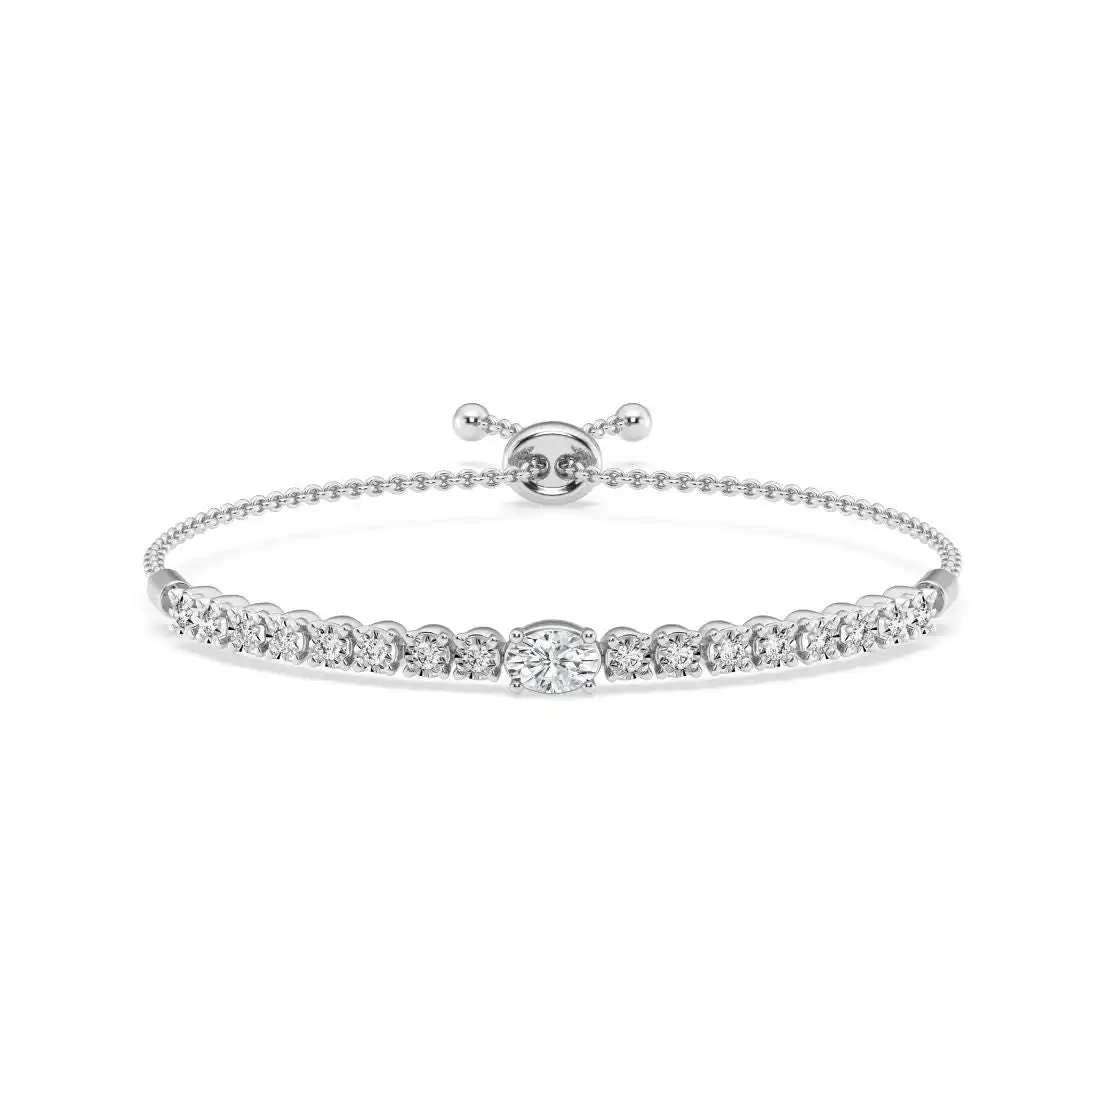 Mirage Bolo Bracelet with 1.00ct of Laboratory Grown Diamonds in Sterling Silver and Platinum